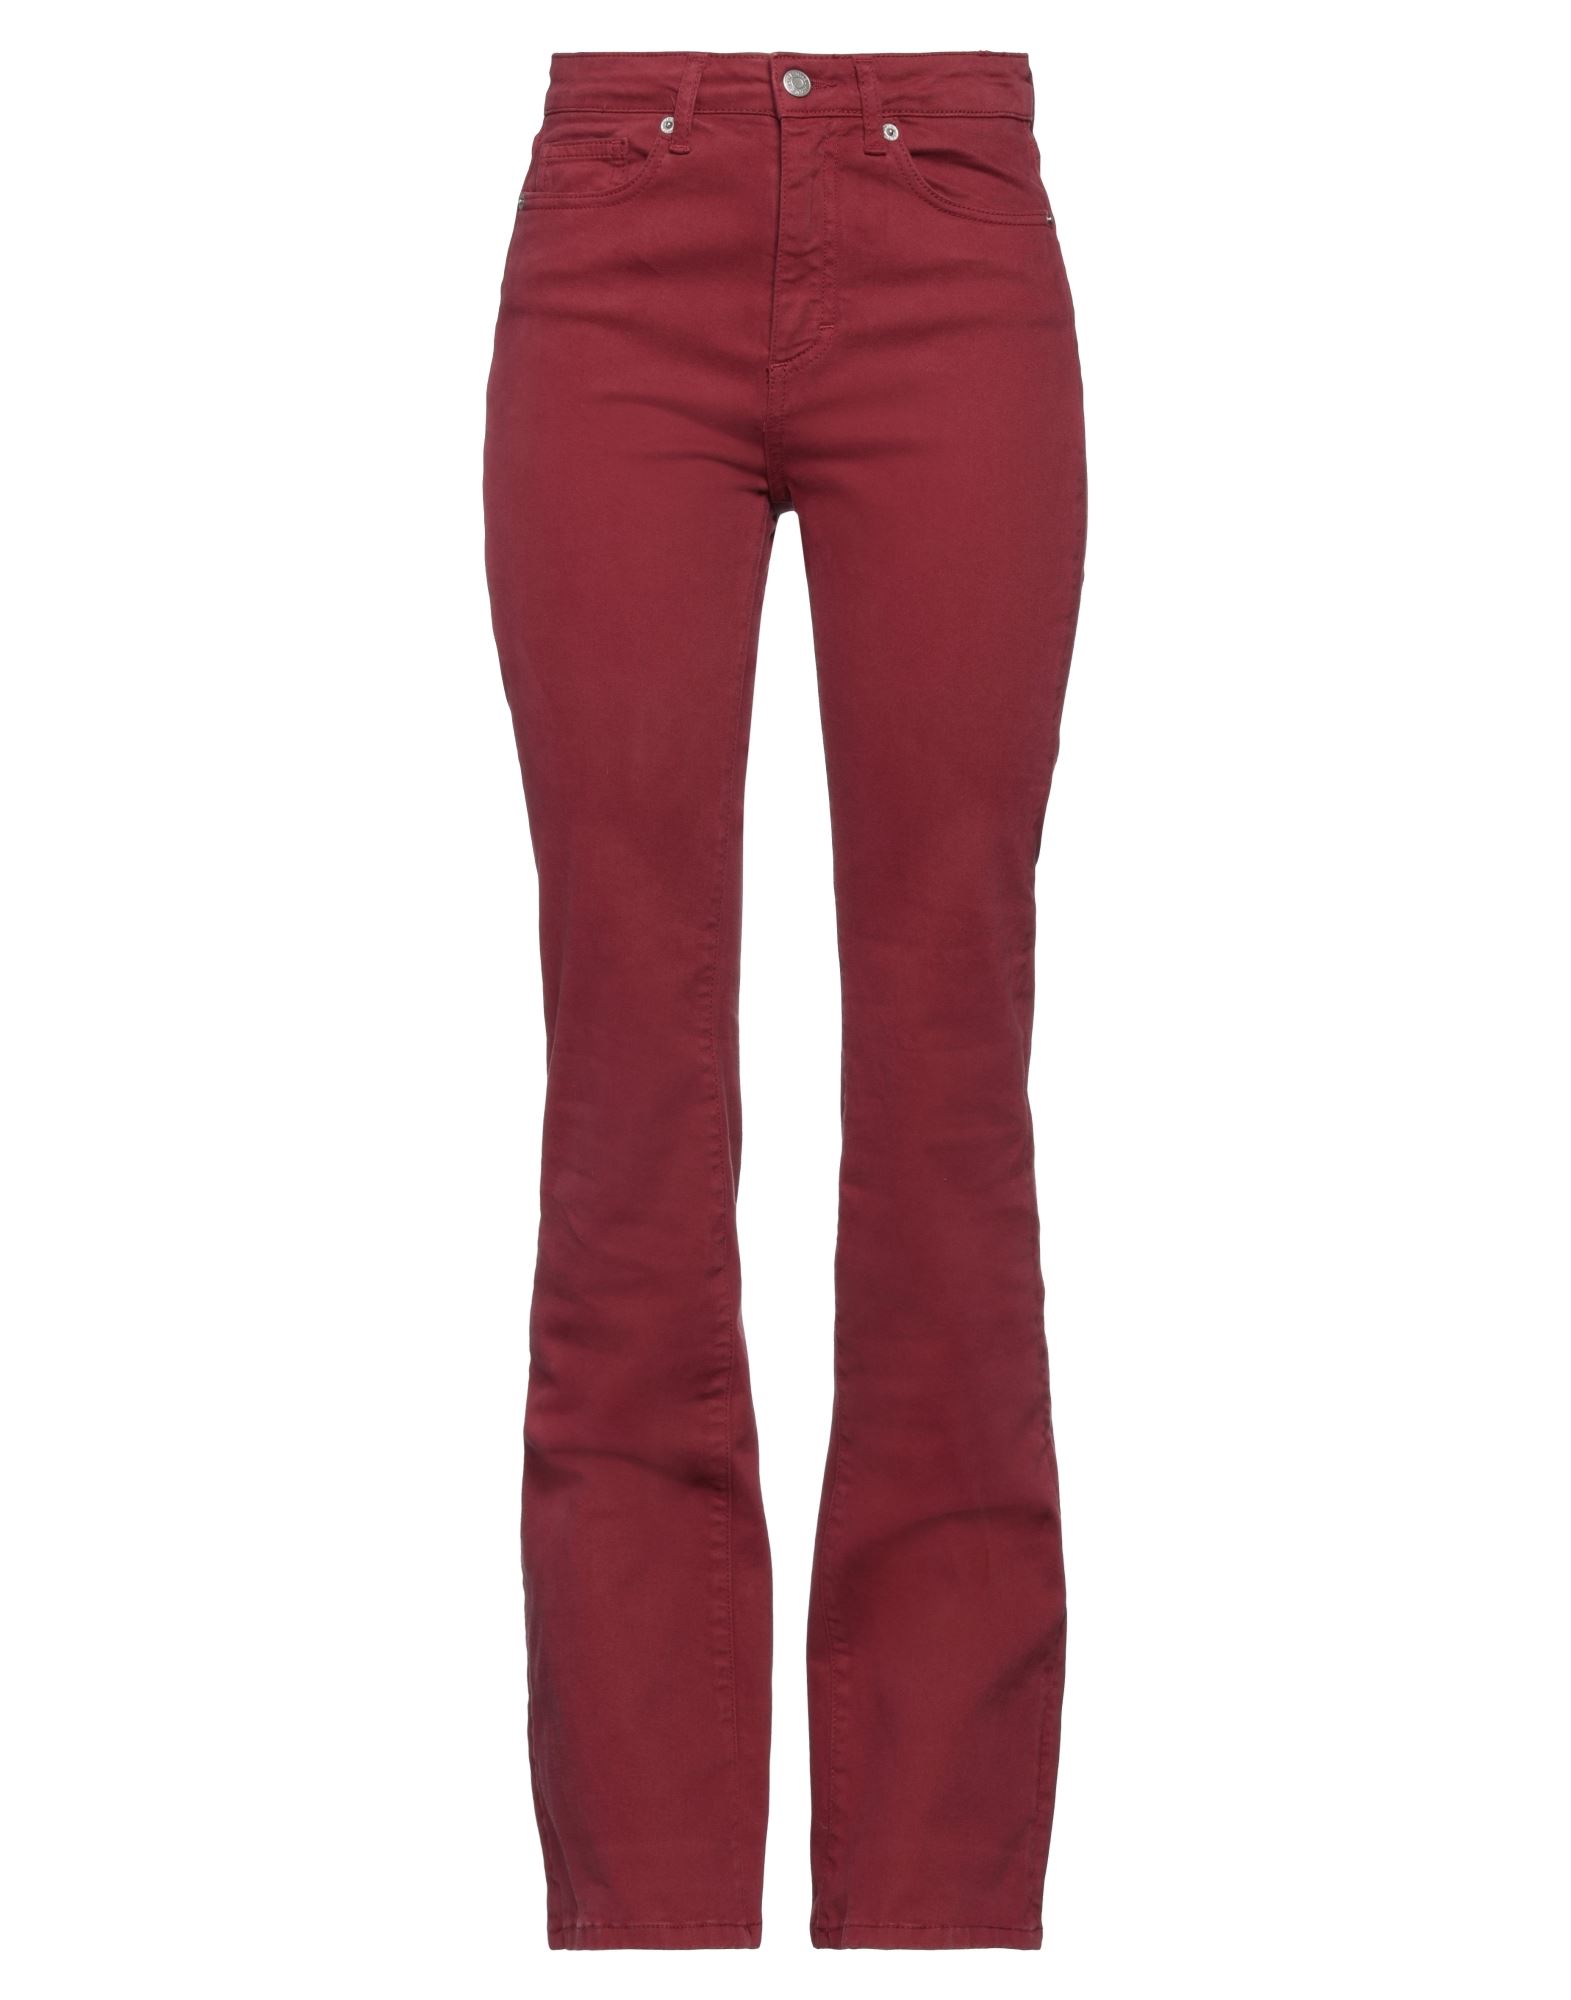 Haveone Jeans In Maroon